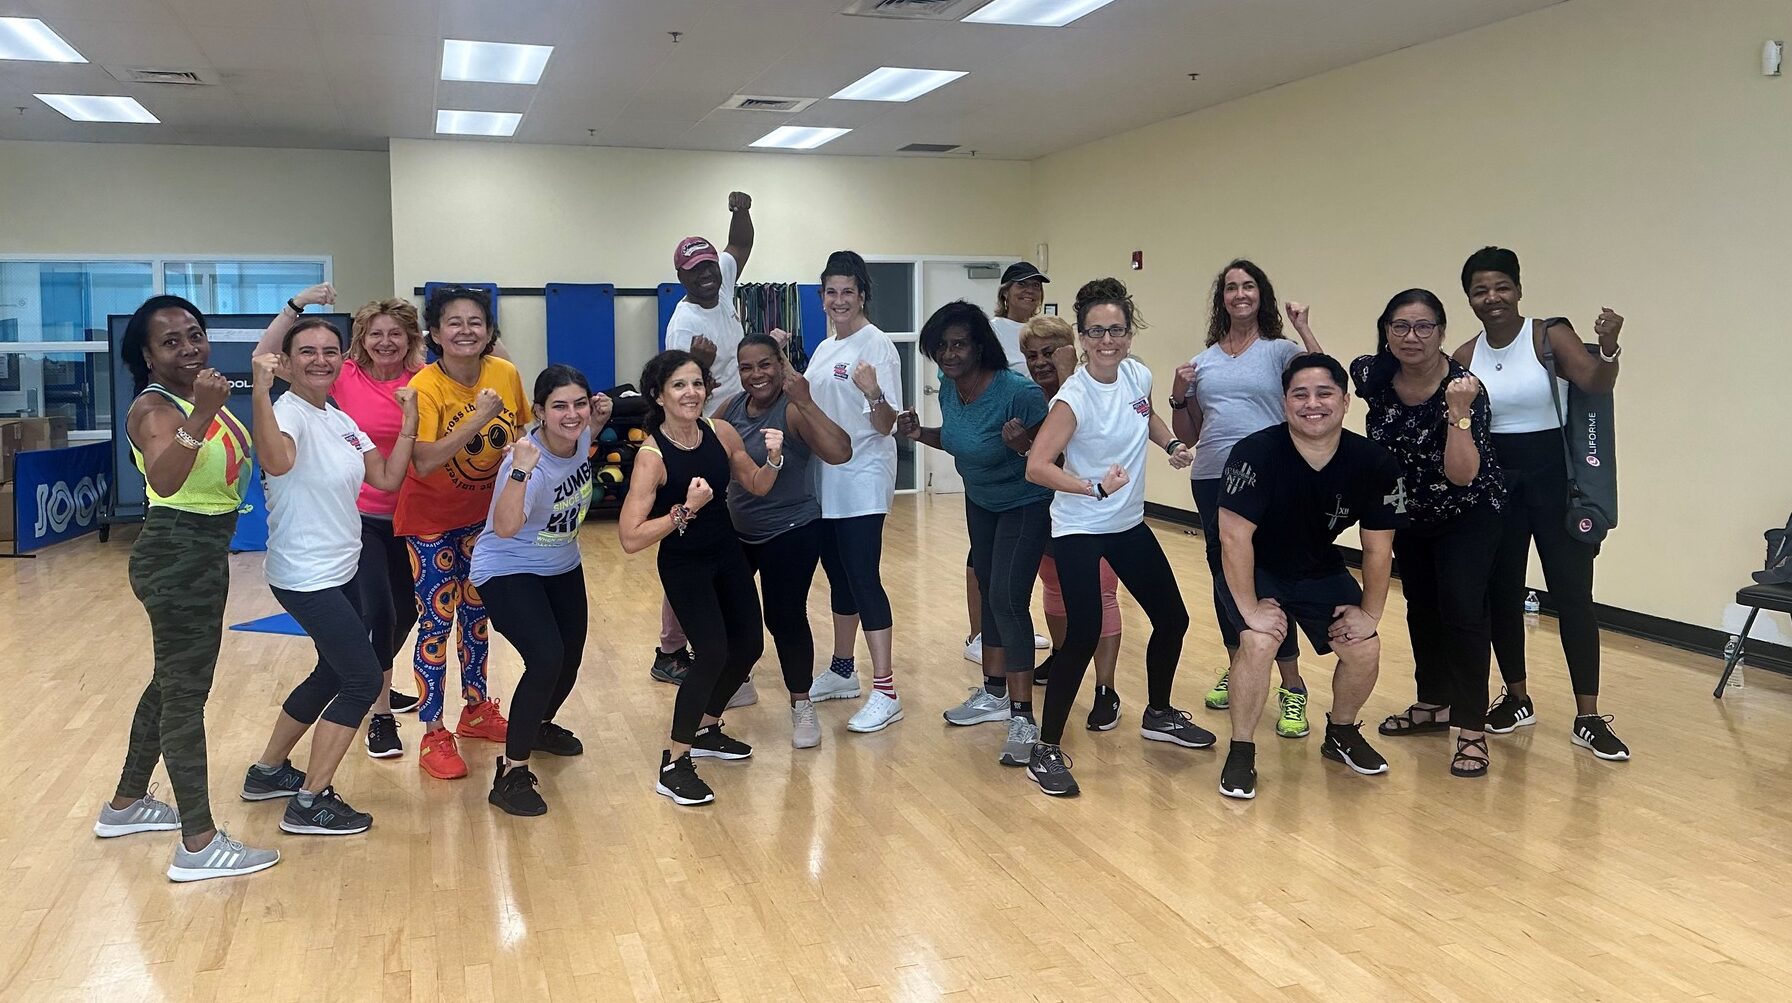 Get Your Groove On During Free Jazzercise Class with the Mayor